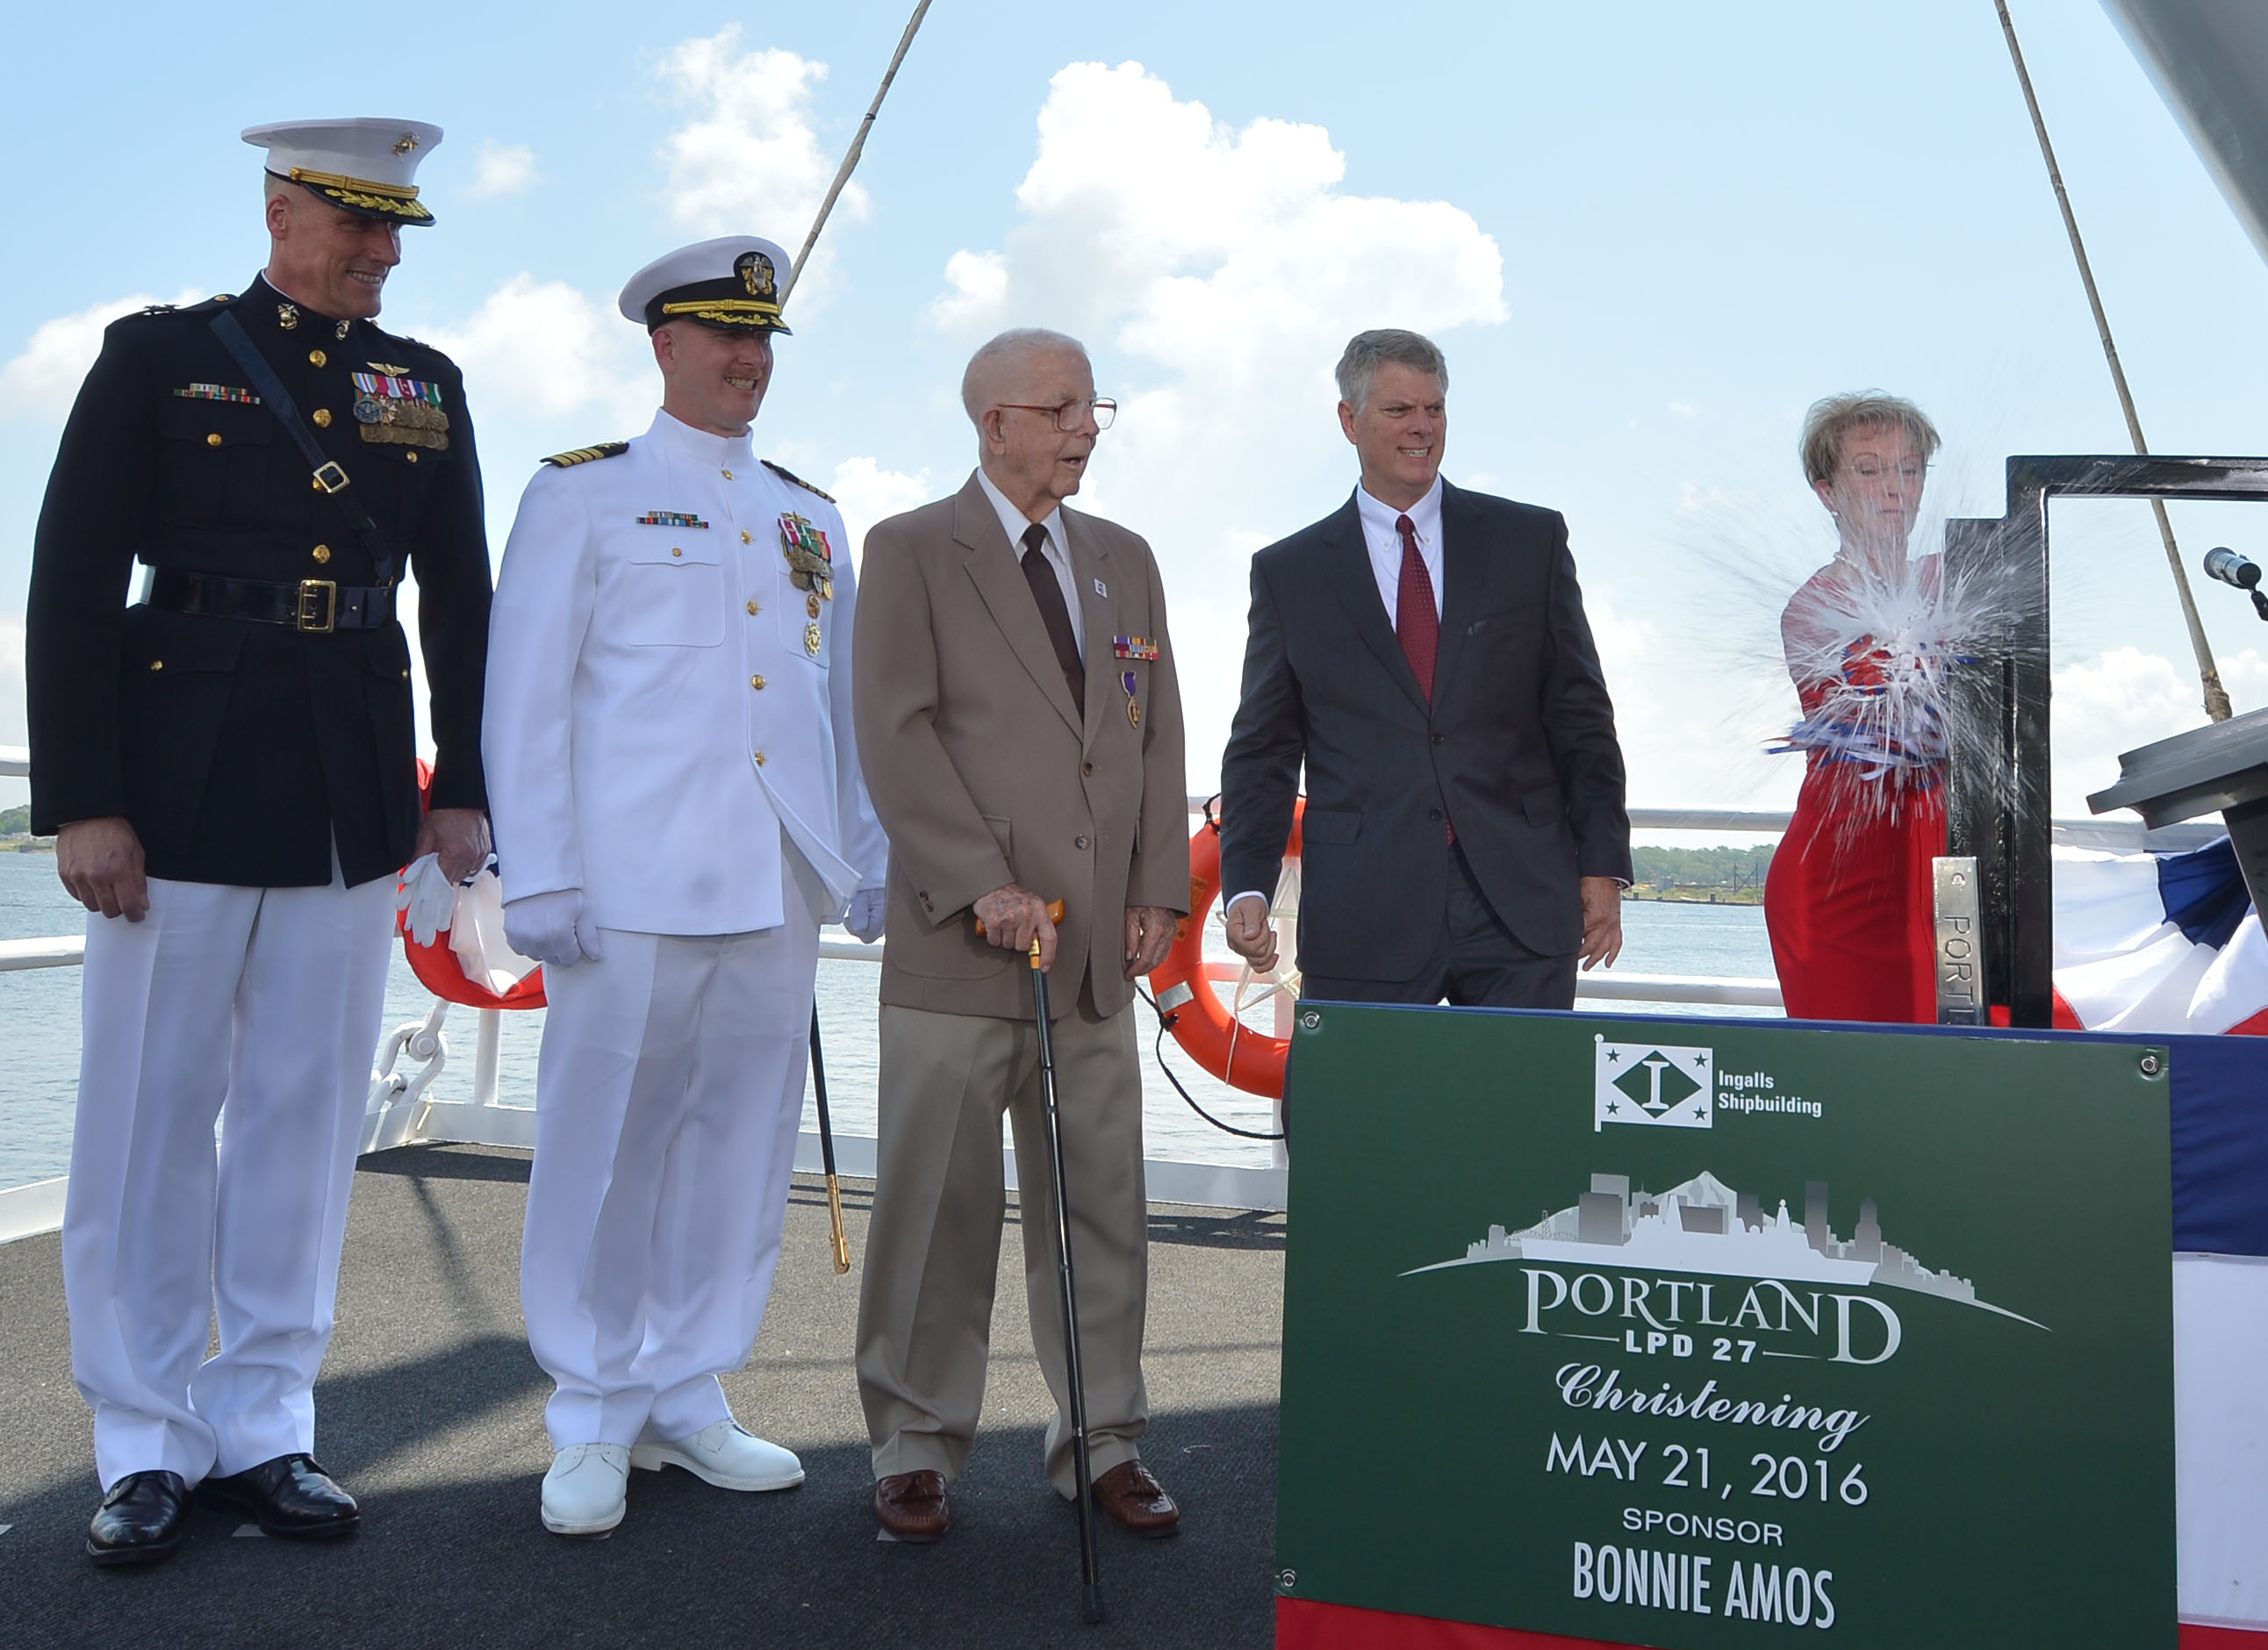 Ship Sponsor Bonnie Amos christens the amphibious transport dock Portland (LPD 27) on May 21, 2016. Amos was accompanied by (left to right) U.S. Marine Corps Maj. Gen. Christopher Owens, director of the U.S. Navy's expeditionary warfare division; Capt. Jeremy Hill, prospective commanding officer, Portland; Ted Waller, a World War II veteran who served on the first USS Portland (CA 33); and Brian Cuccias, president of Ingalls Shipbuilding. US Navy photo.